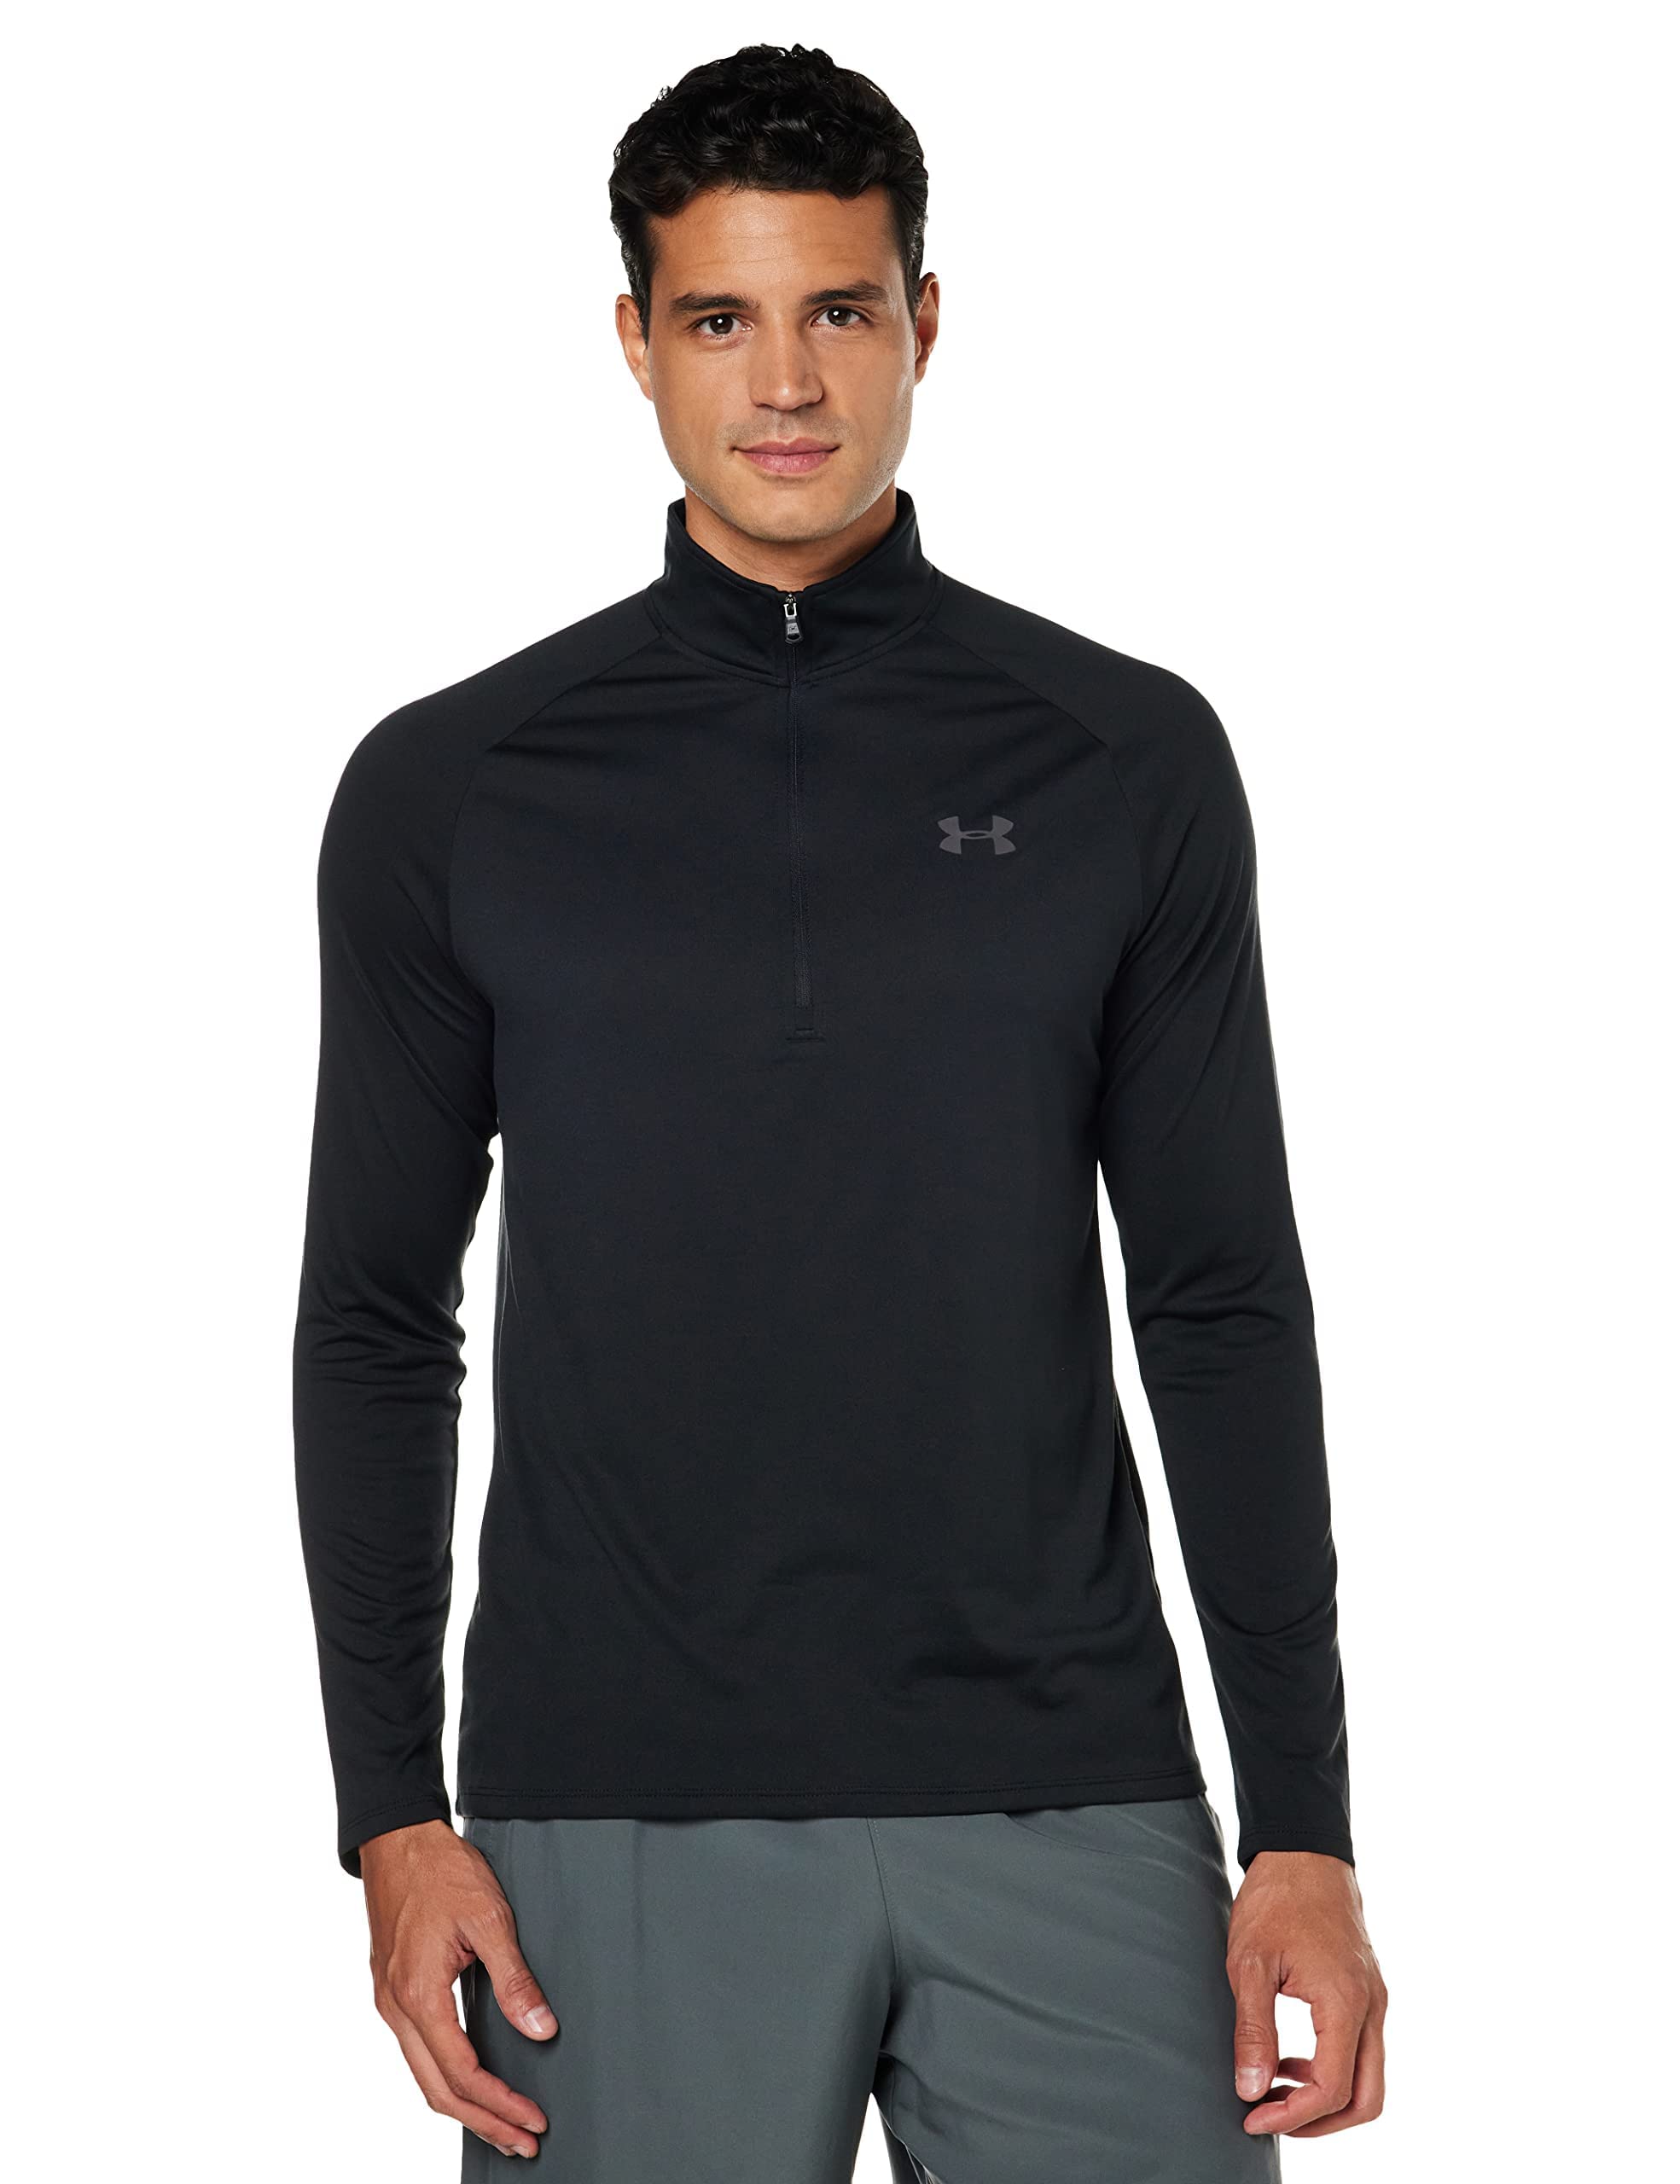 Under Armour Men's Tech 2.0 1/2 Zip Pullover (Black/Charcoal) $15 + Free Shipping w/ Prime or on $25+